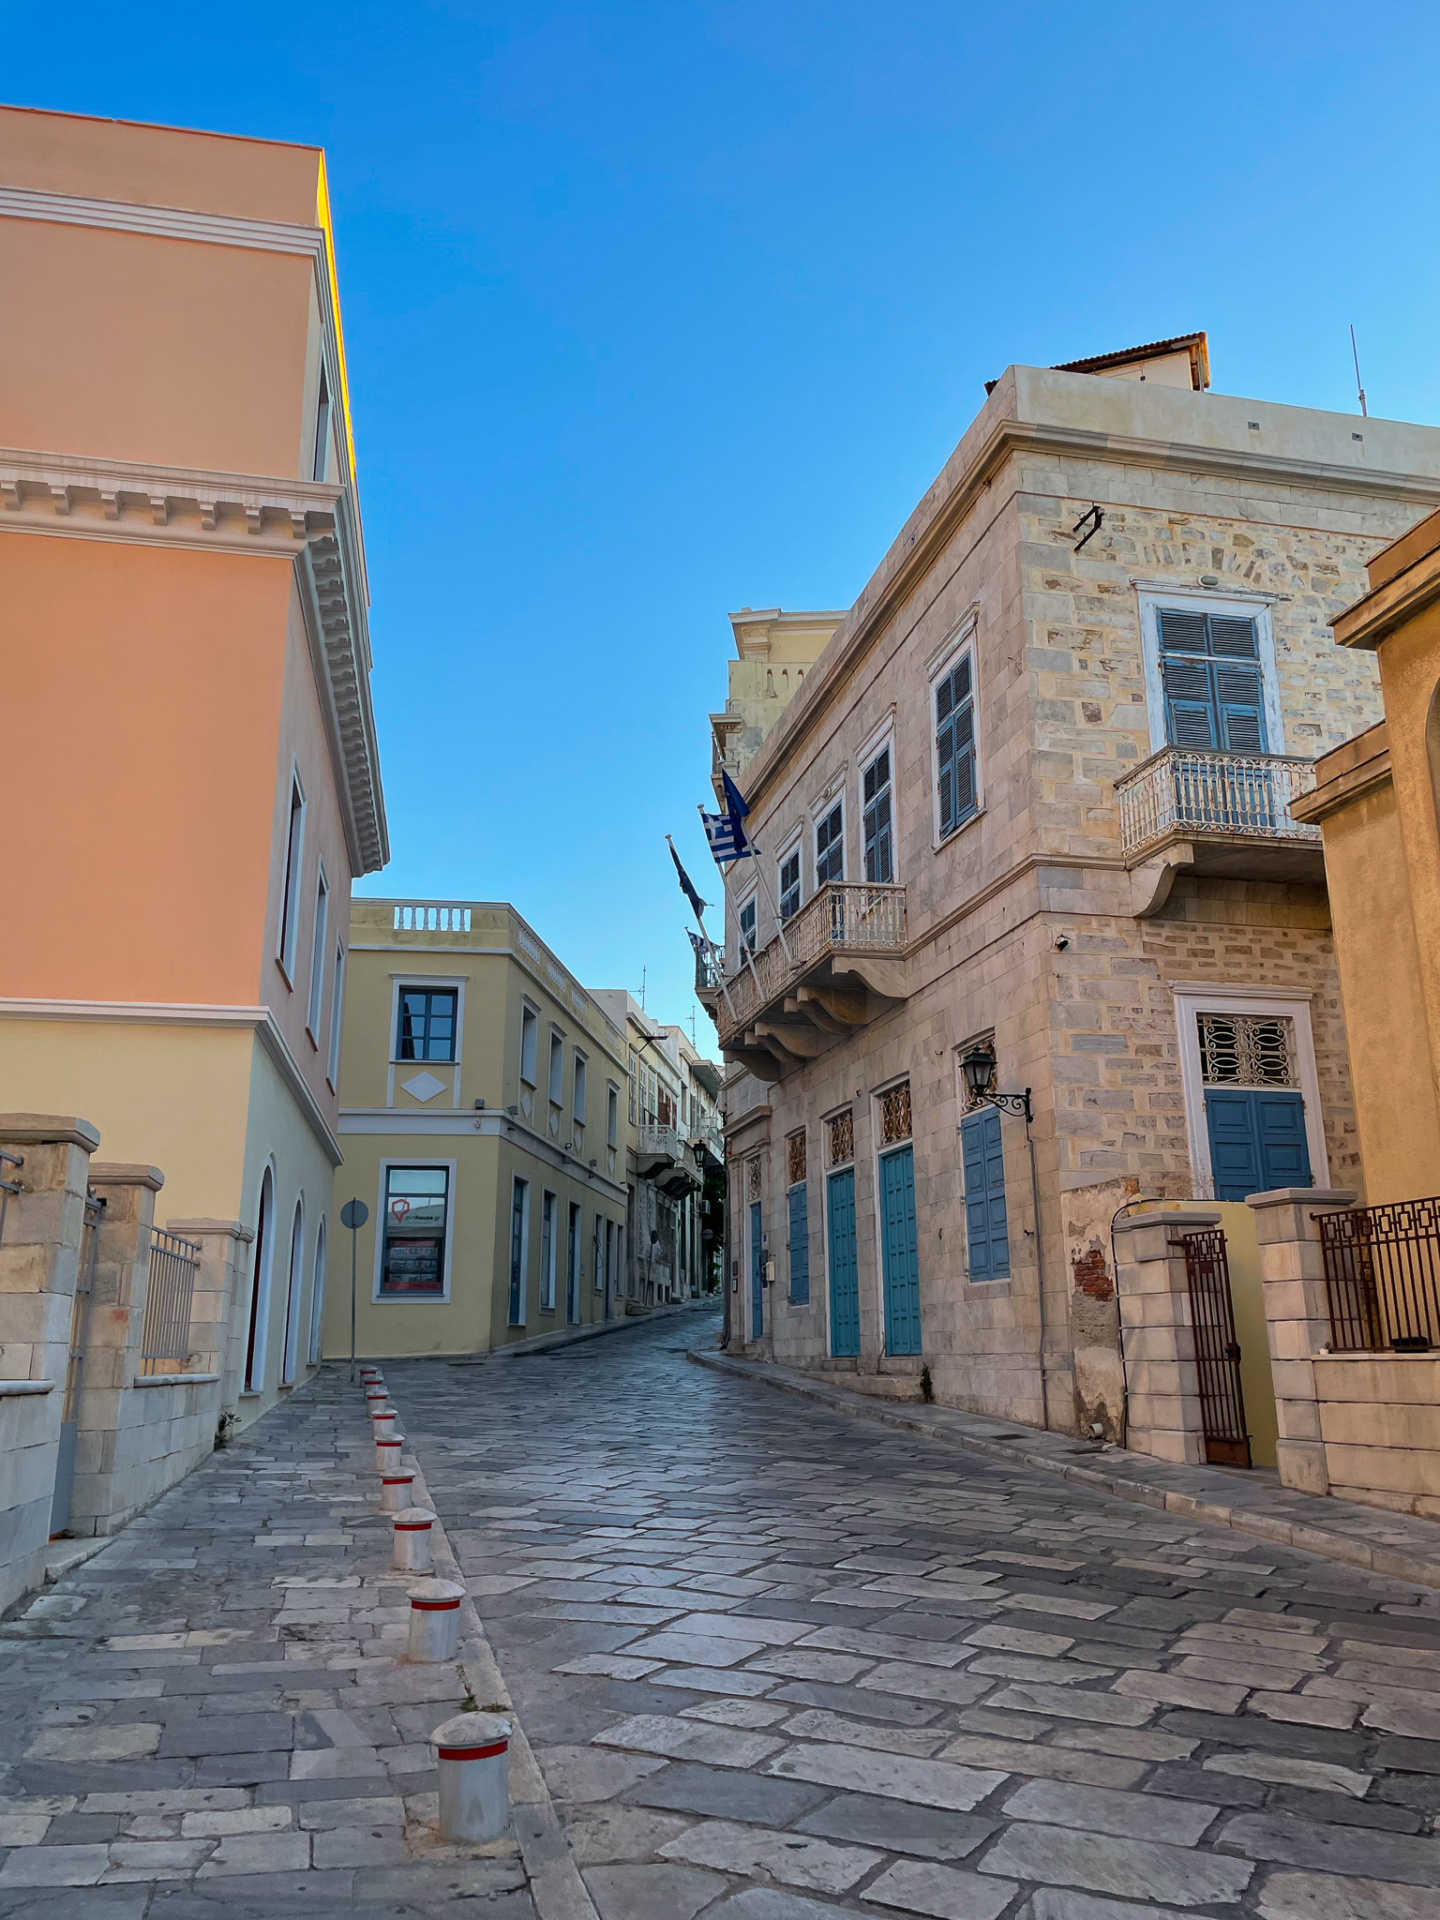 Syros Travel Guide - Things to do in Syros - Syros Blog